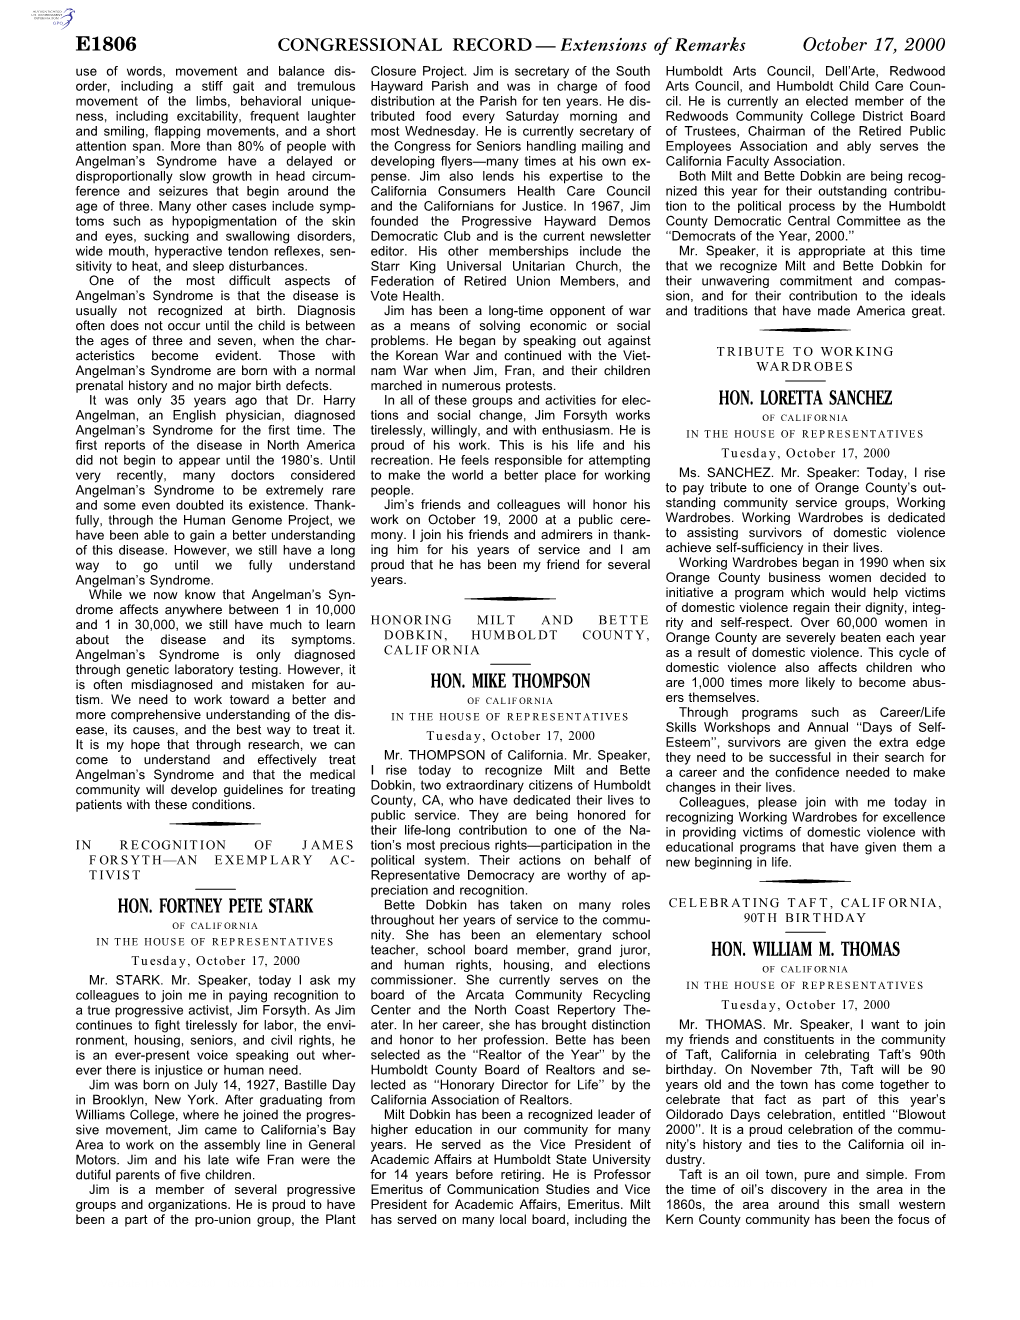 CONGRESSIONAL RECORD— Extensions of Remarks E1806 HON